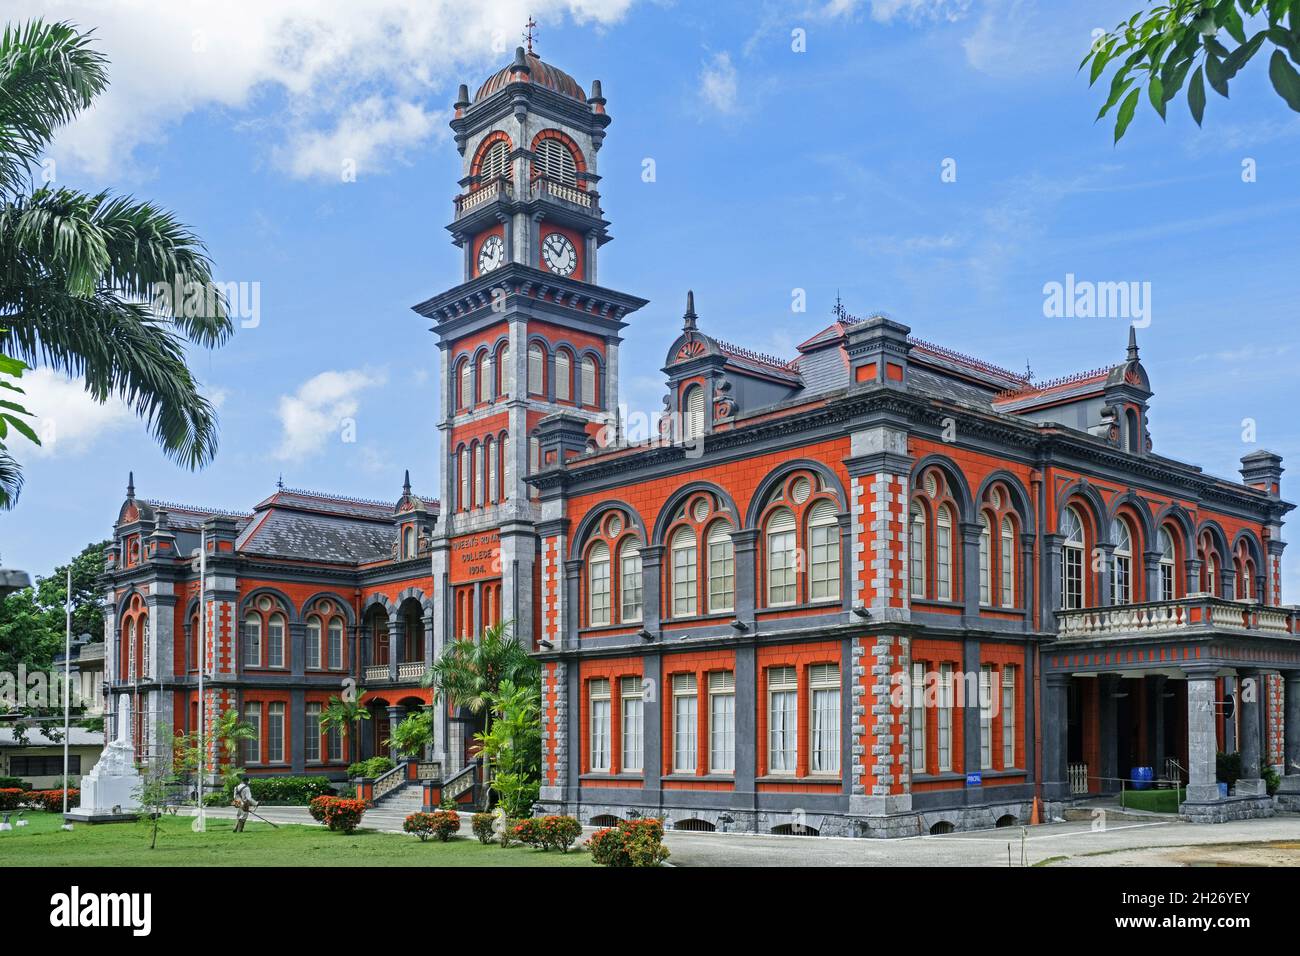 Queen's Royal College, part of the Magnificent Seven on Maraval Road in Port of Spain, capital city of Trinidad and Tobago in the Caribbean Stock Photo